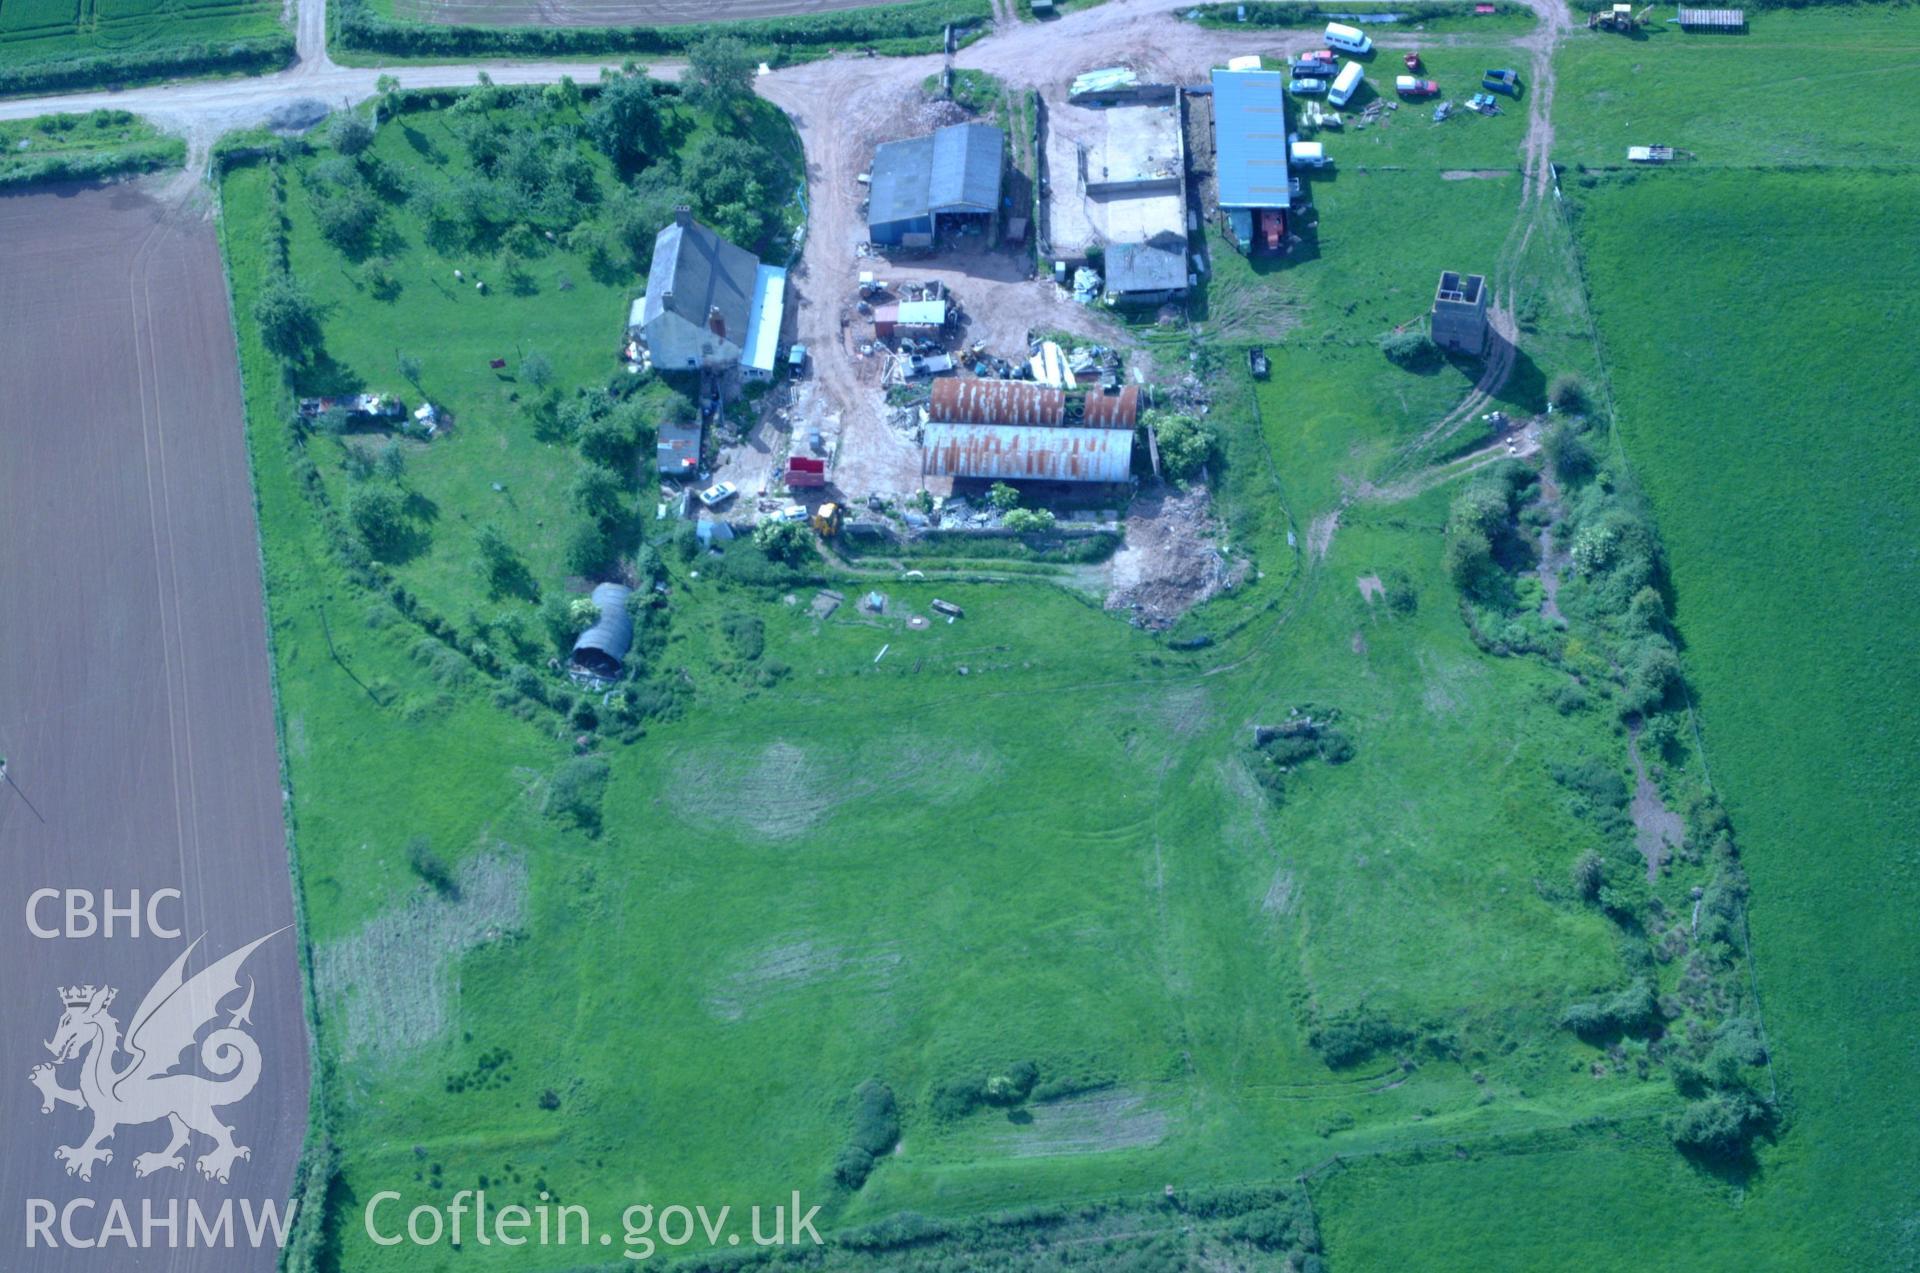 RCAHMW colour oblique aerial photograph of Perth-hir ruins taken on 02/06/2004 by Toby Driver